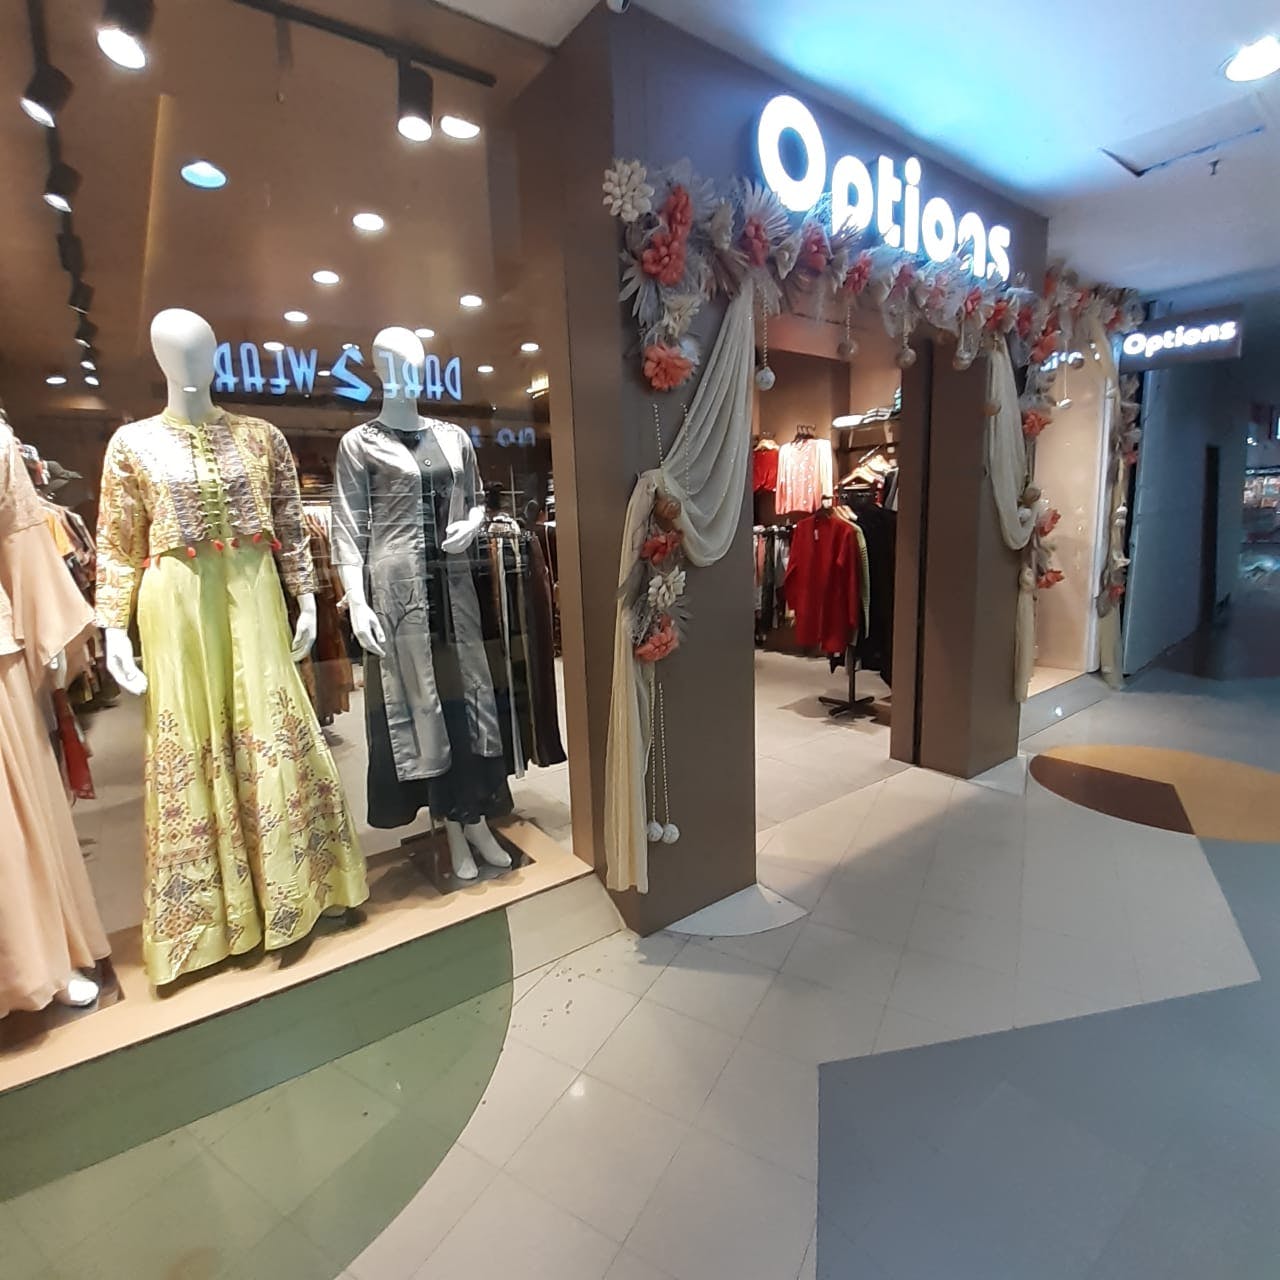 Boutique,Outlet store,Shopping mall,Fashion,Retail,Building,Display window,Dress,Shopping,Interior design